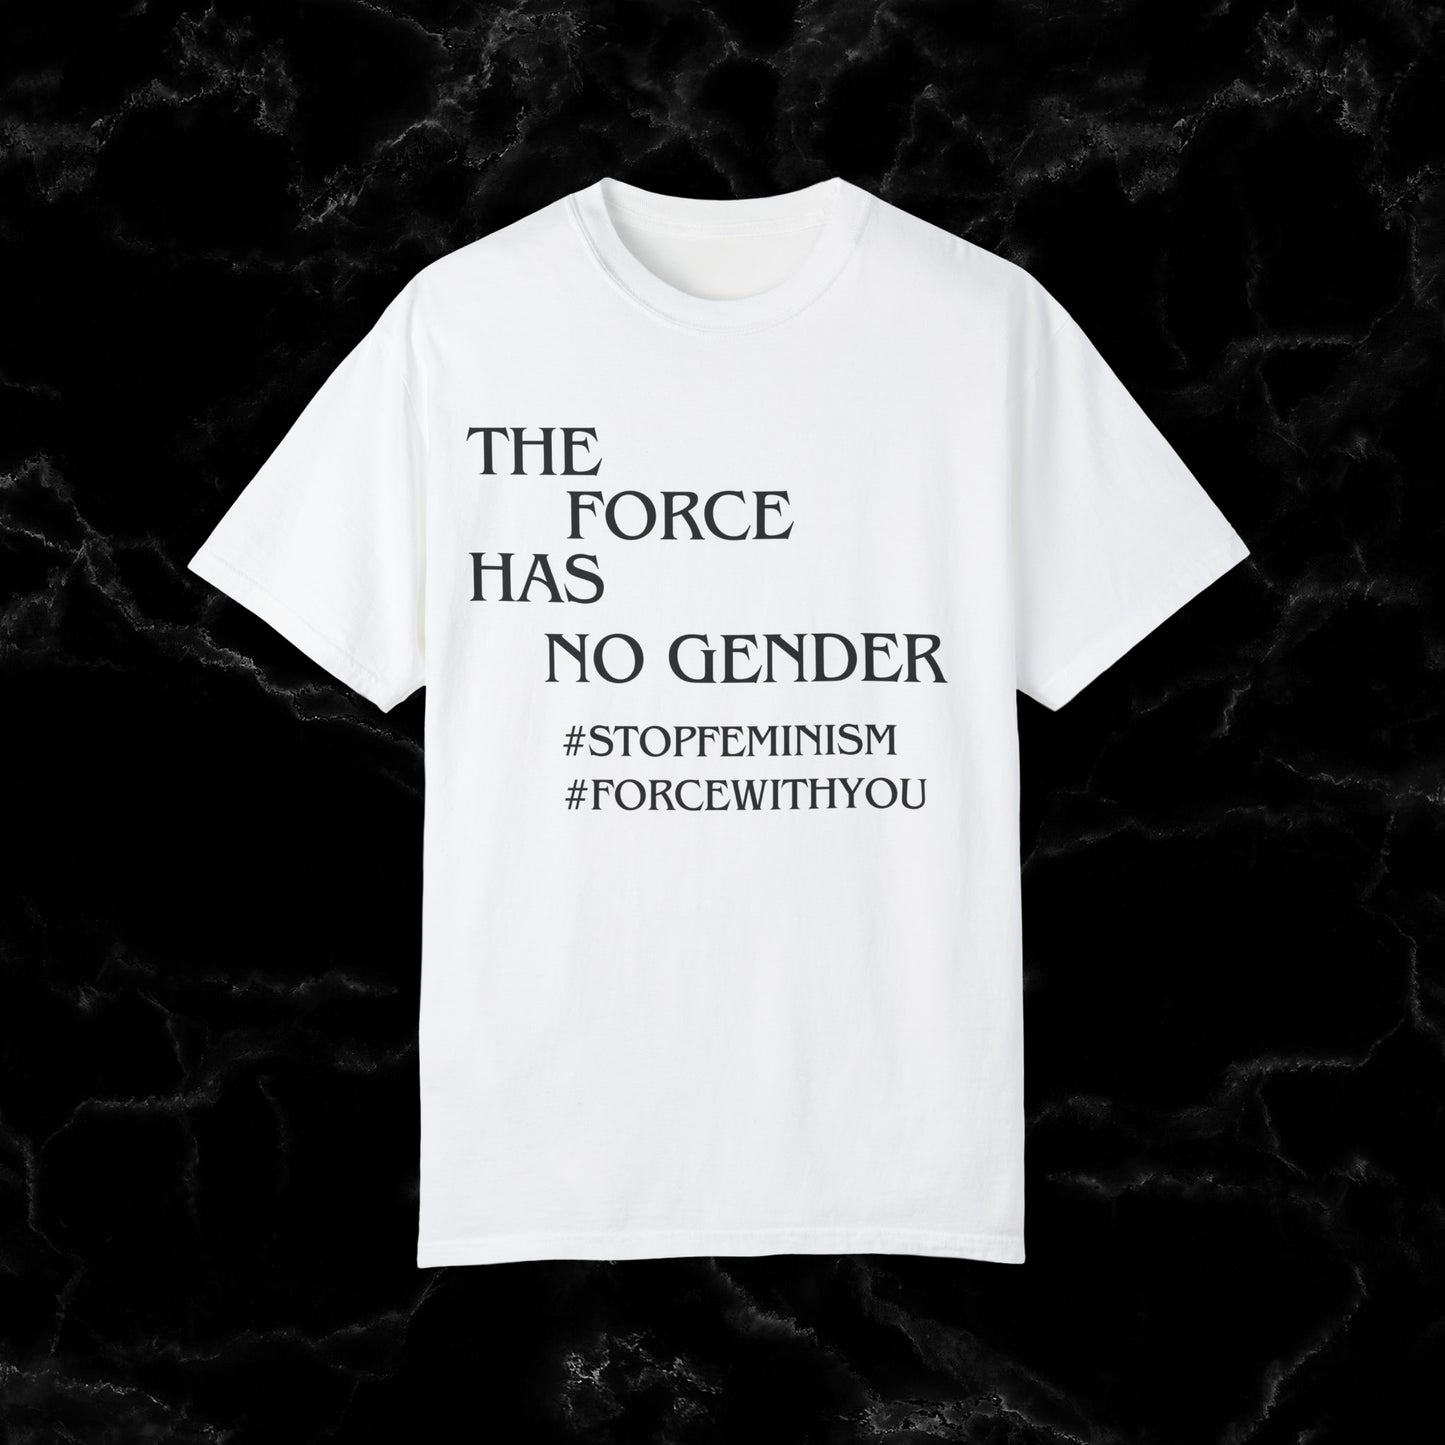 The Force Has No Gender, Embrace Inclusivity with 'Force With You' Star Wars Inspired Shirt T-Shirt White S 